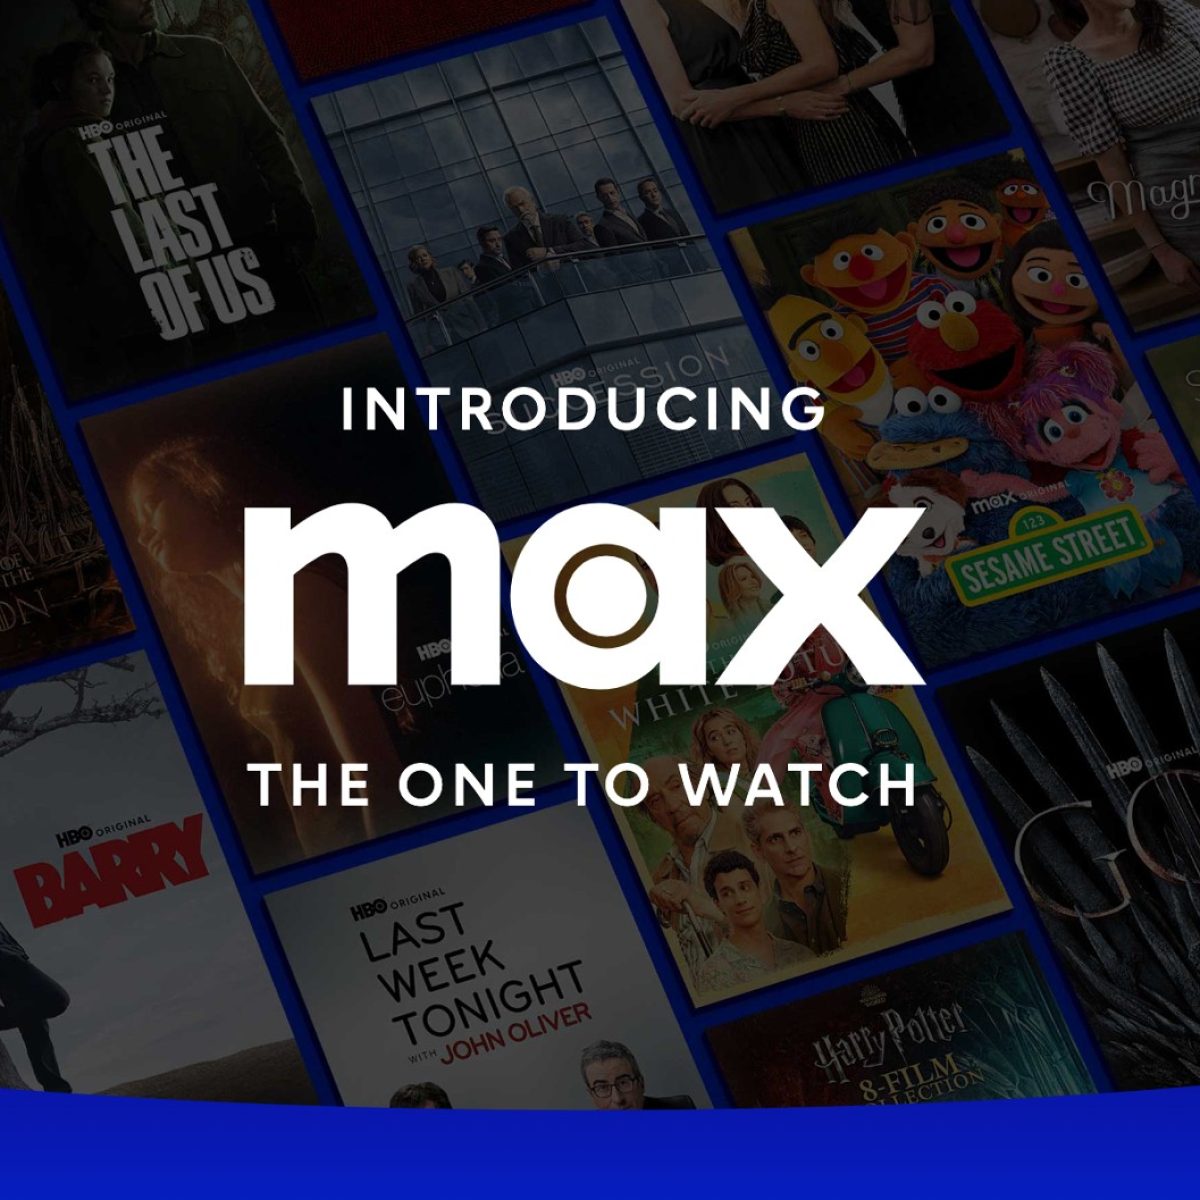 You can now subscribe to HBO, HBO Max and Cinemax through